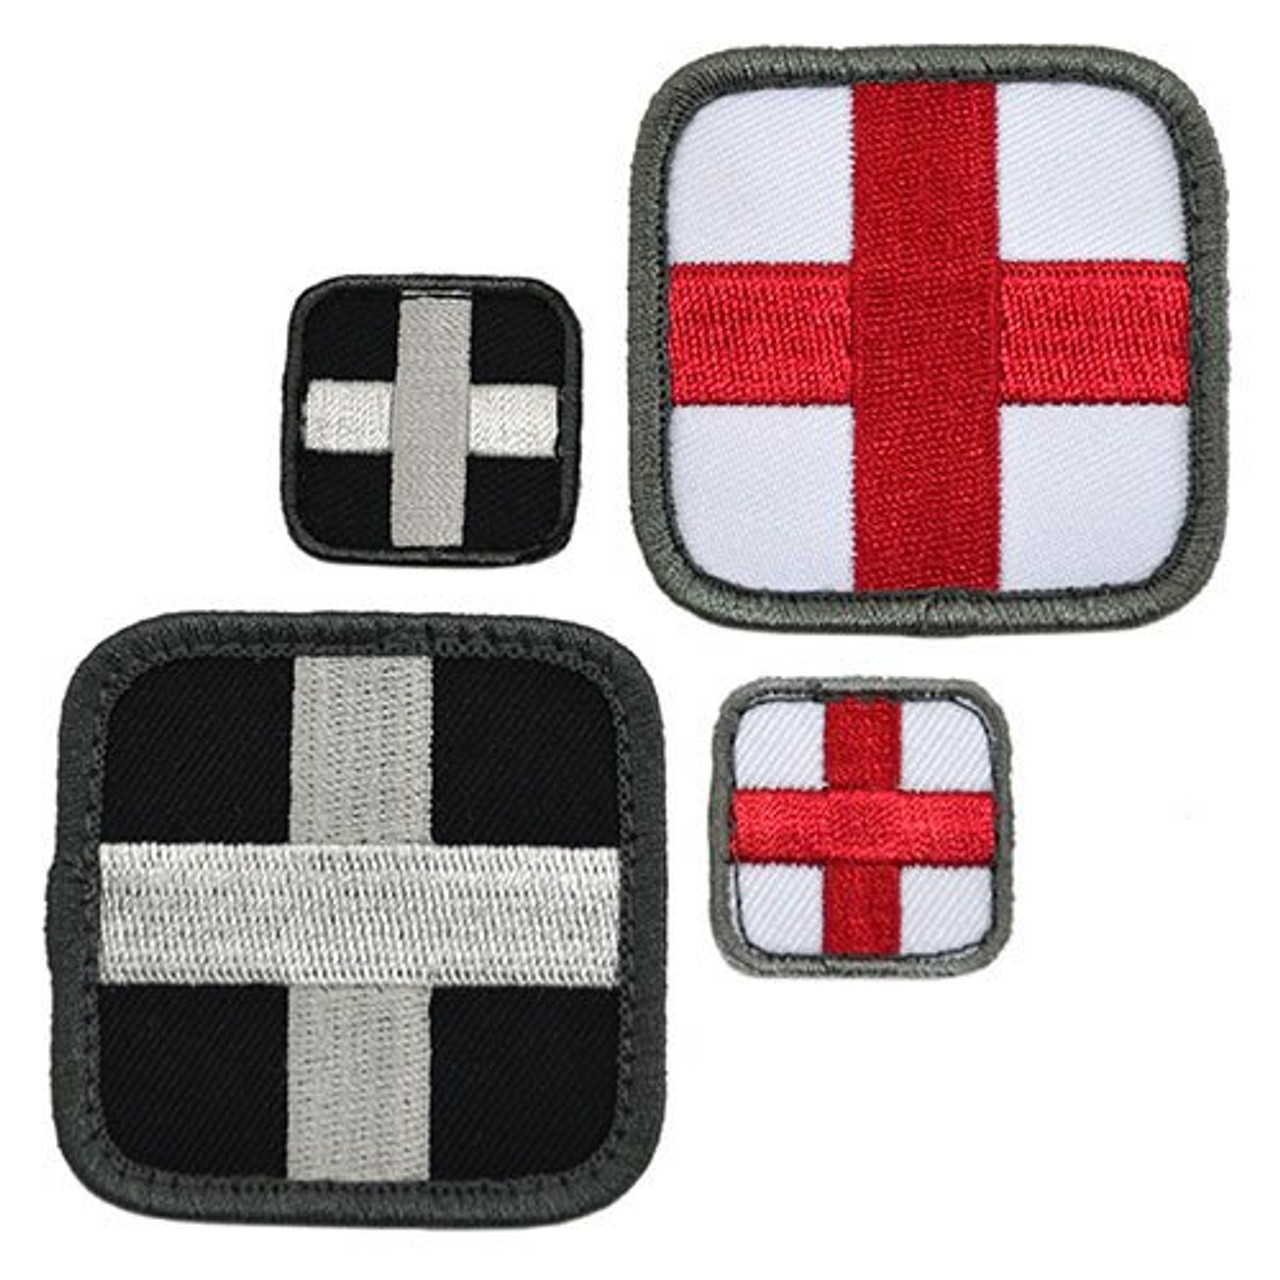 Embroidered Square Medical Patch